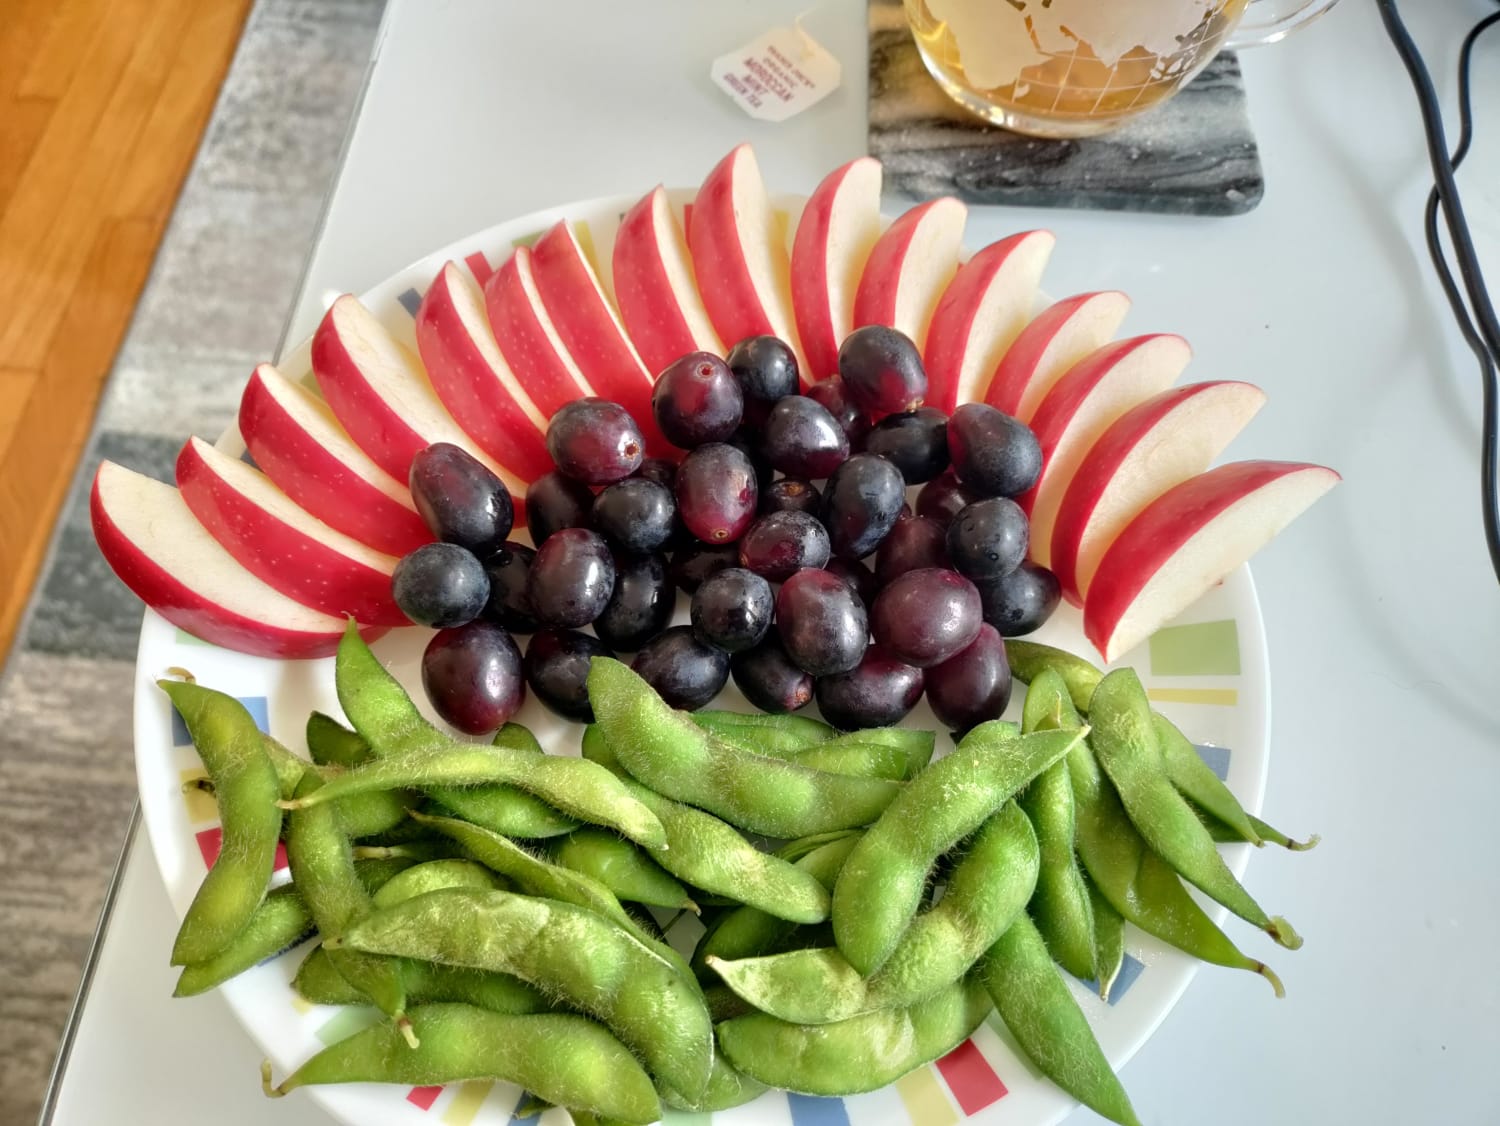 Snack Plate